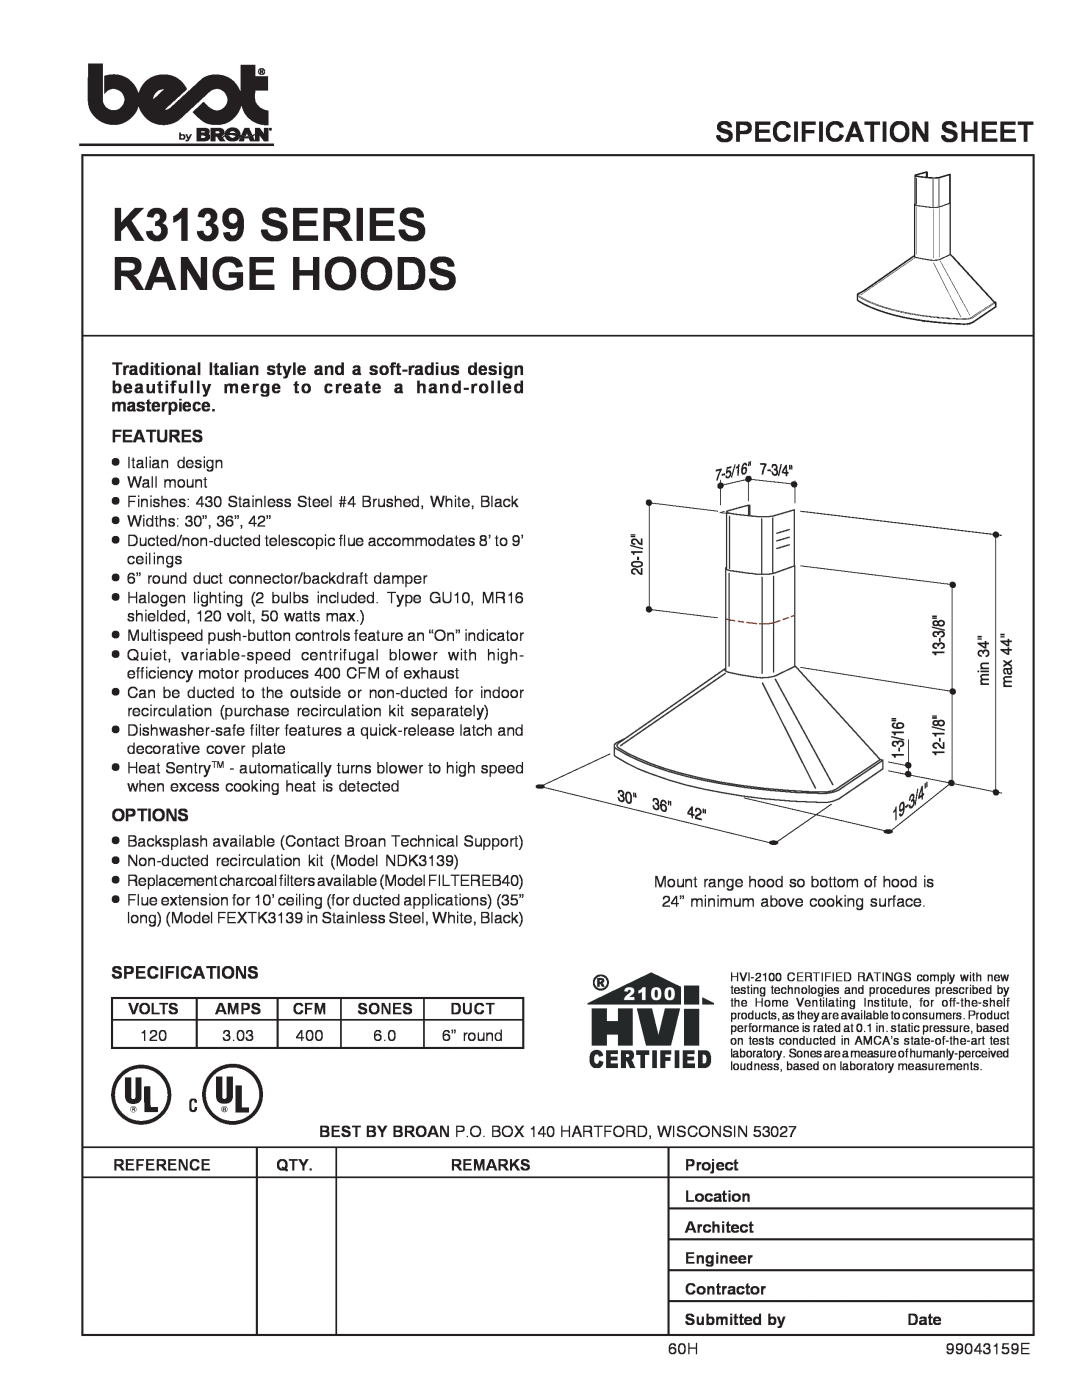 Best K3139 Series specifications 3.03, 6” round, 99043159E, K3139 SERIES RANGE HOODS, Specification Sheet, Features 